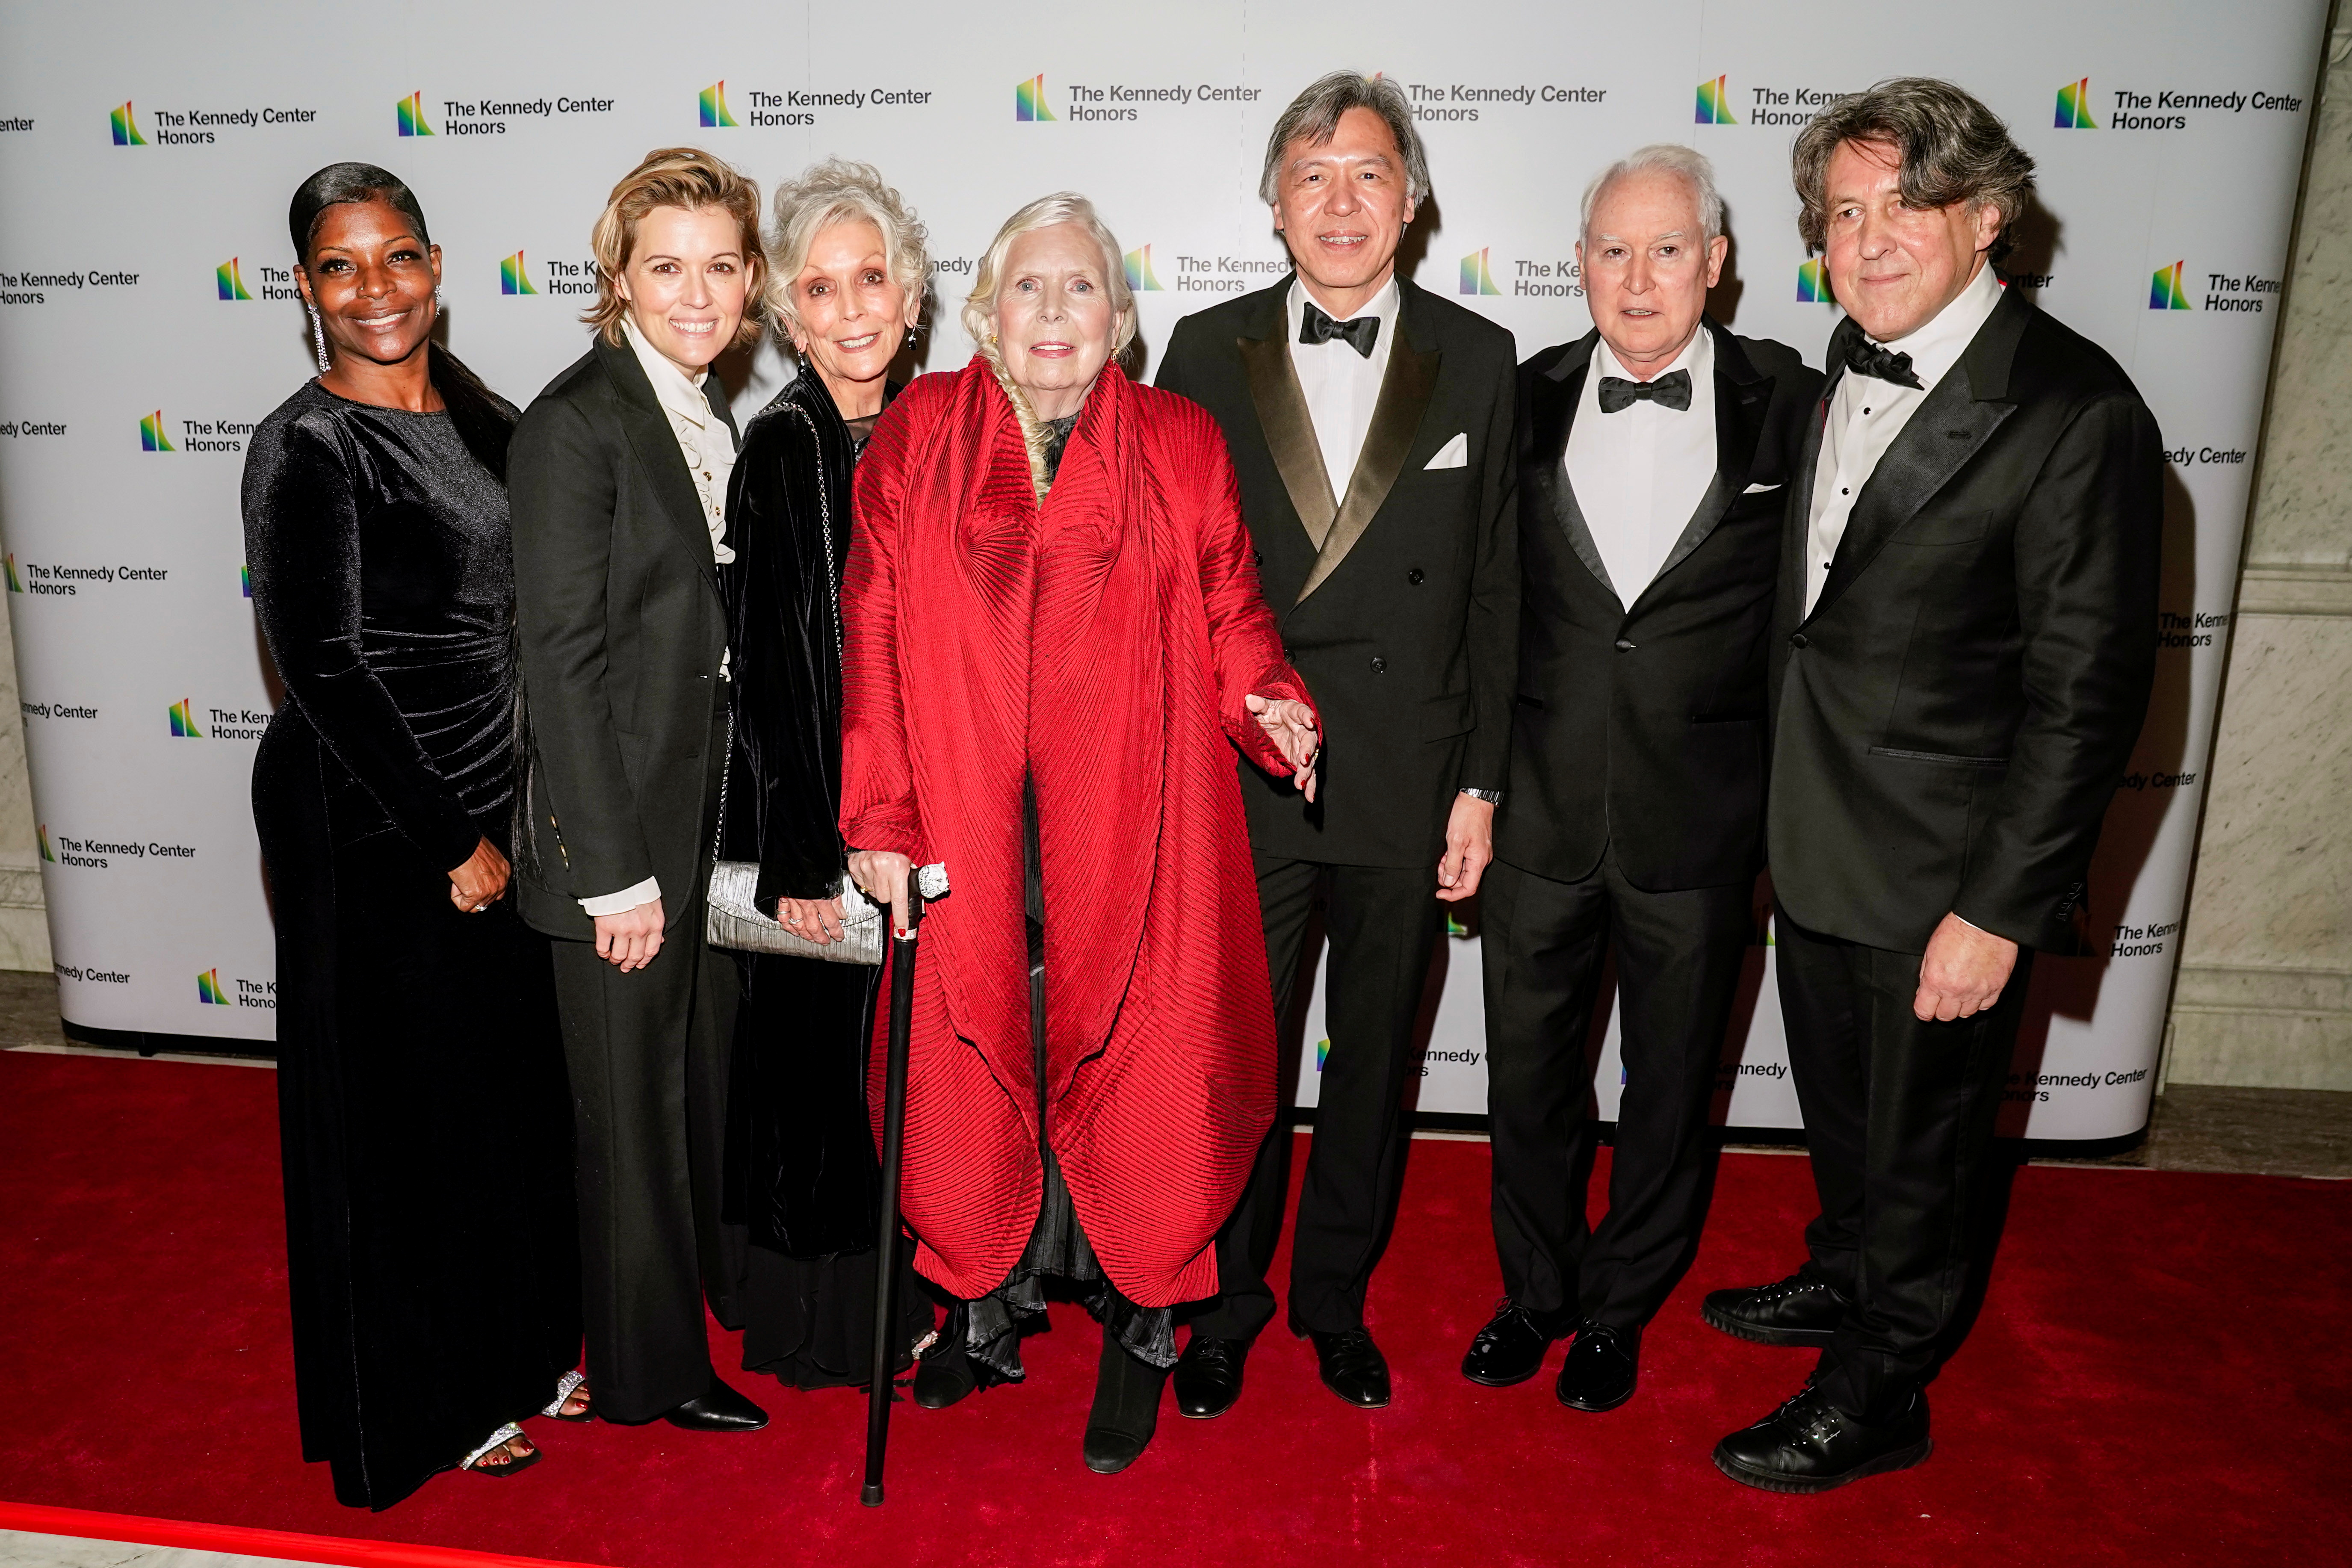 Singer-songwriter Joni Mitchell poses on the red carpet with friends and family as she attends the 44th Kennedy Center Honors Medallion Ceremony at the Library of Congress in Washington, D.C., U.S., December 4, 2021. REUTERS/Ken Cedeno